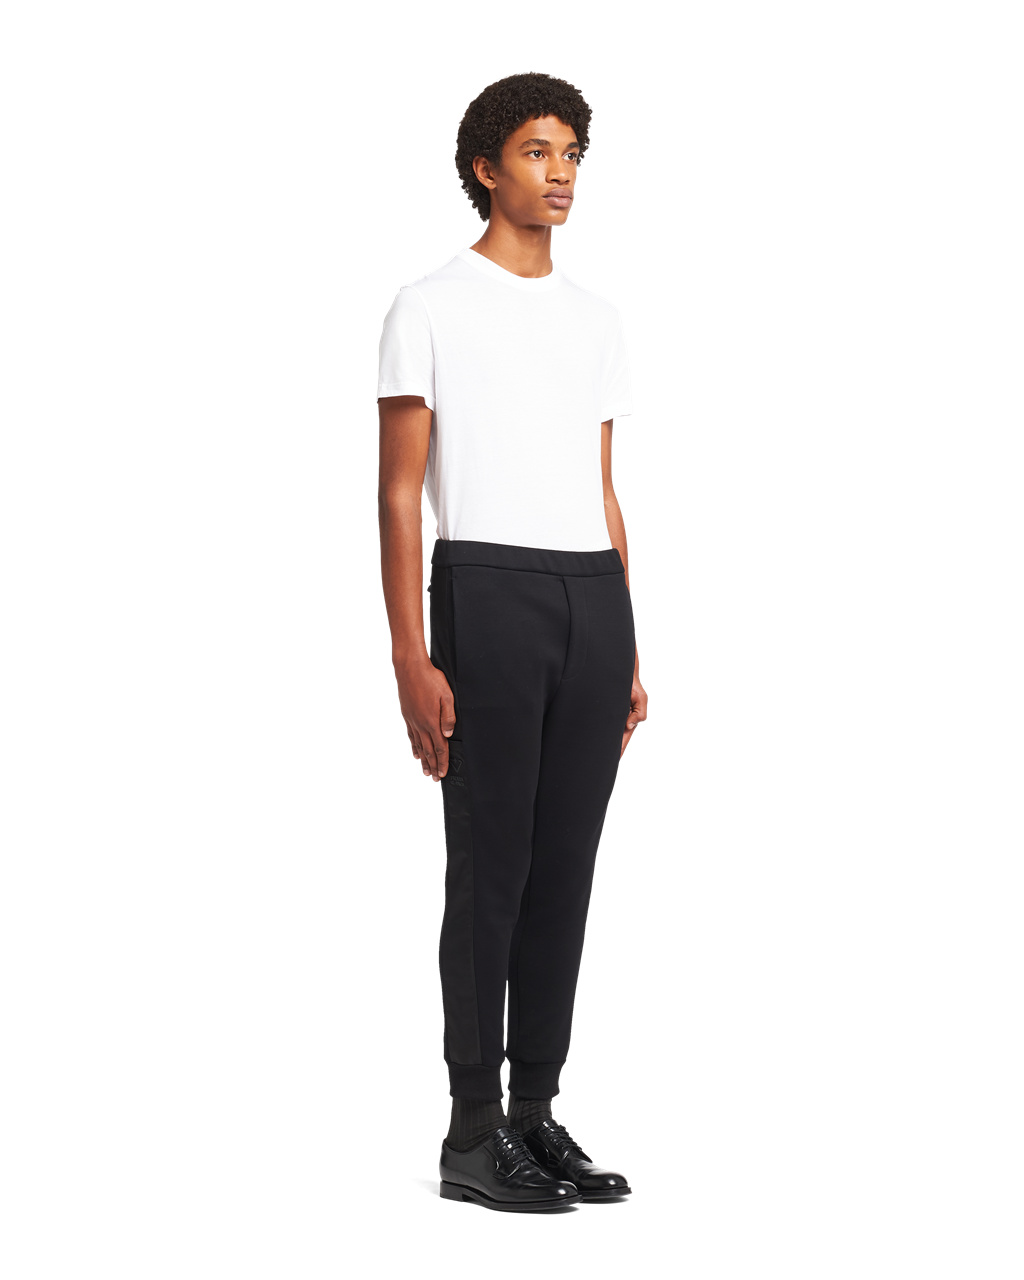 Prada Sweatpants Outlet South Africa Online - Sweatpants With Nylon ...